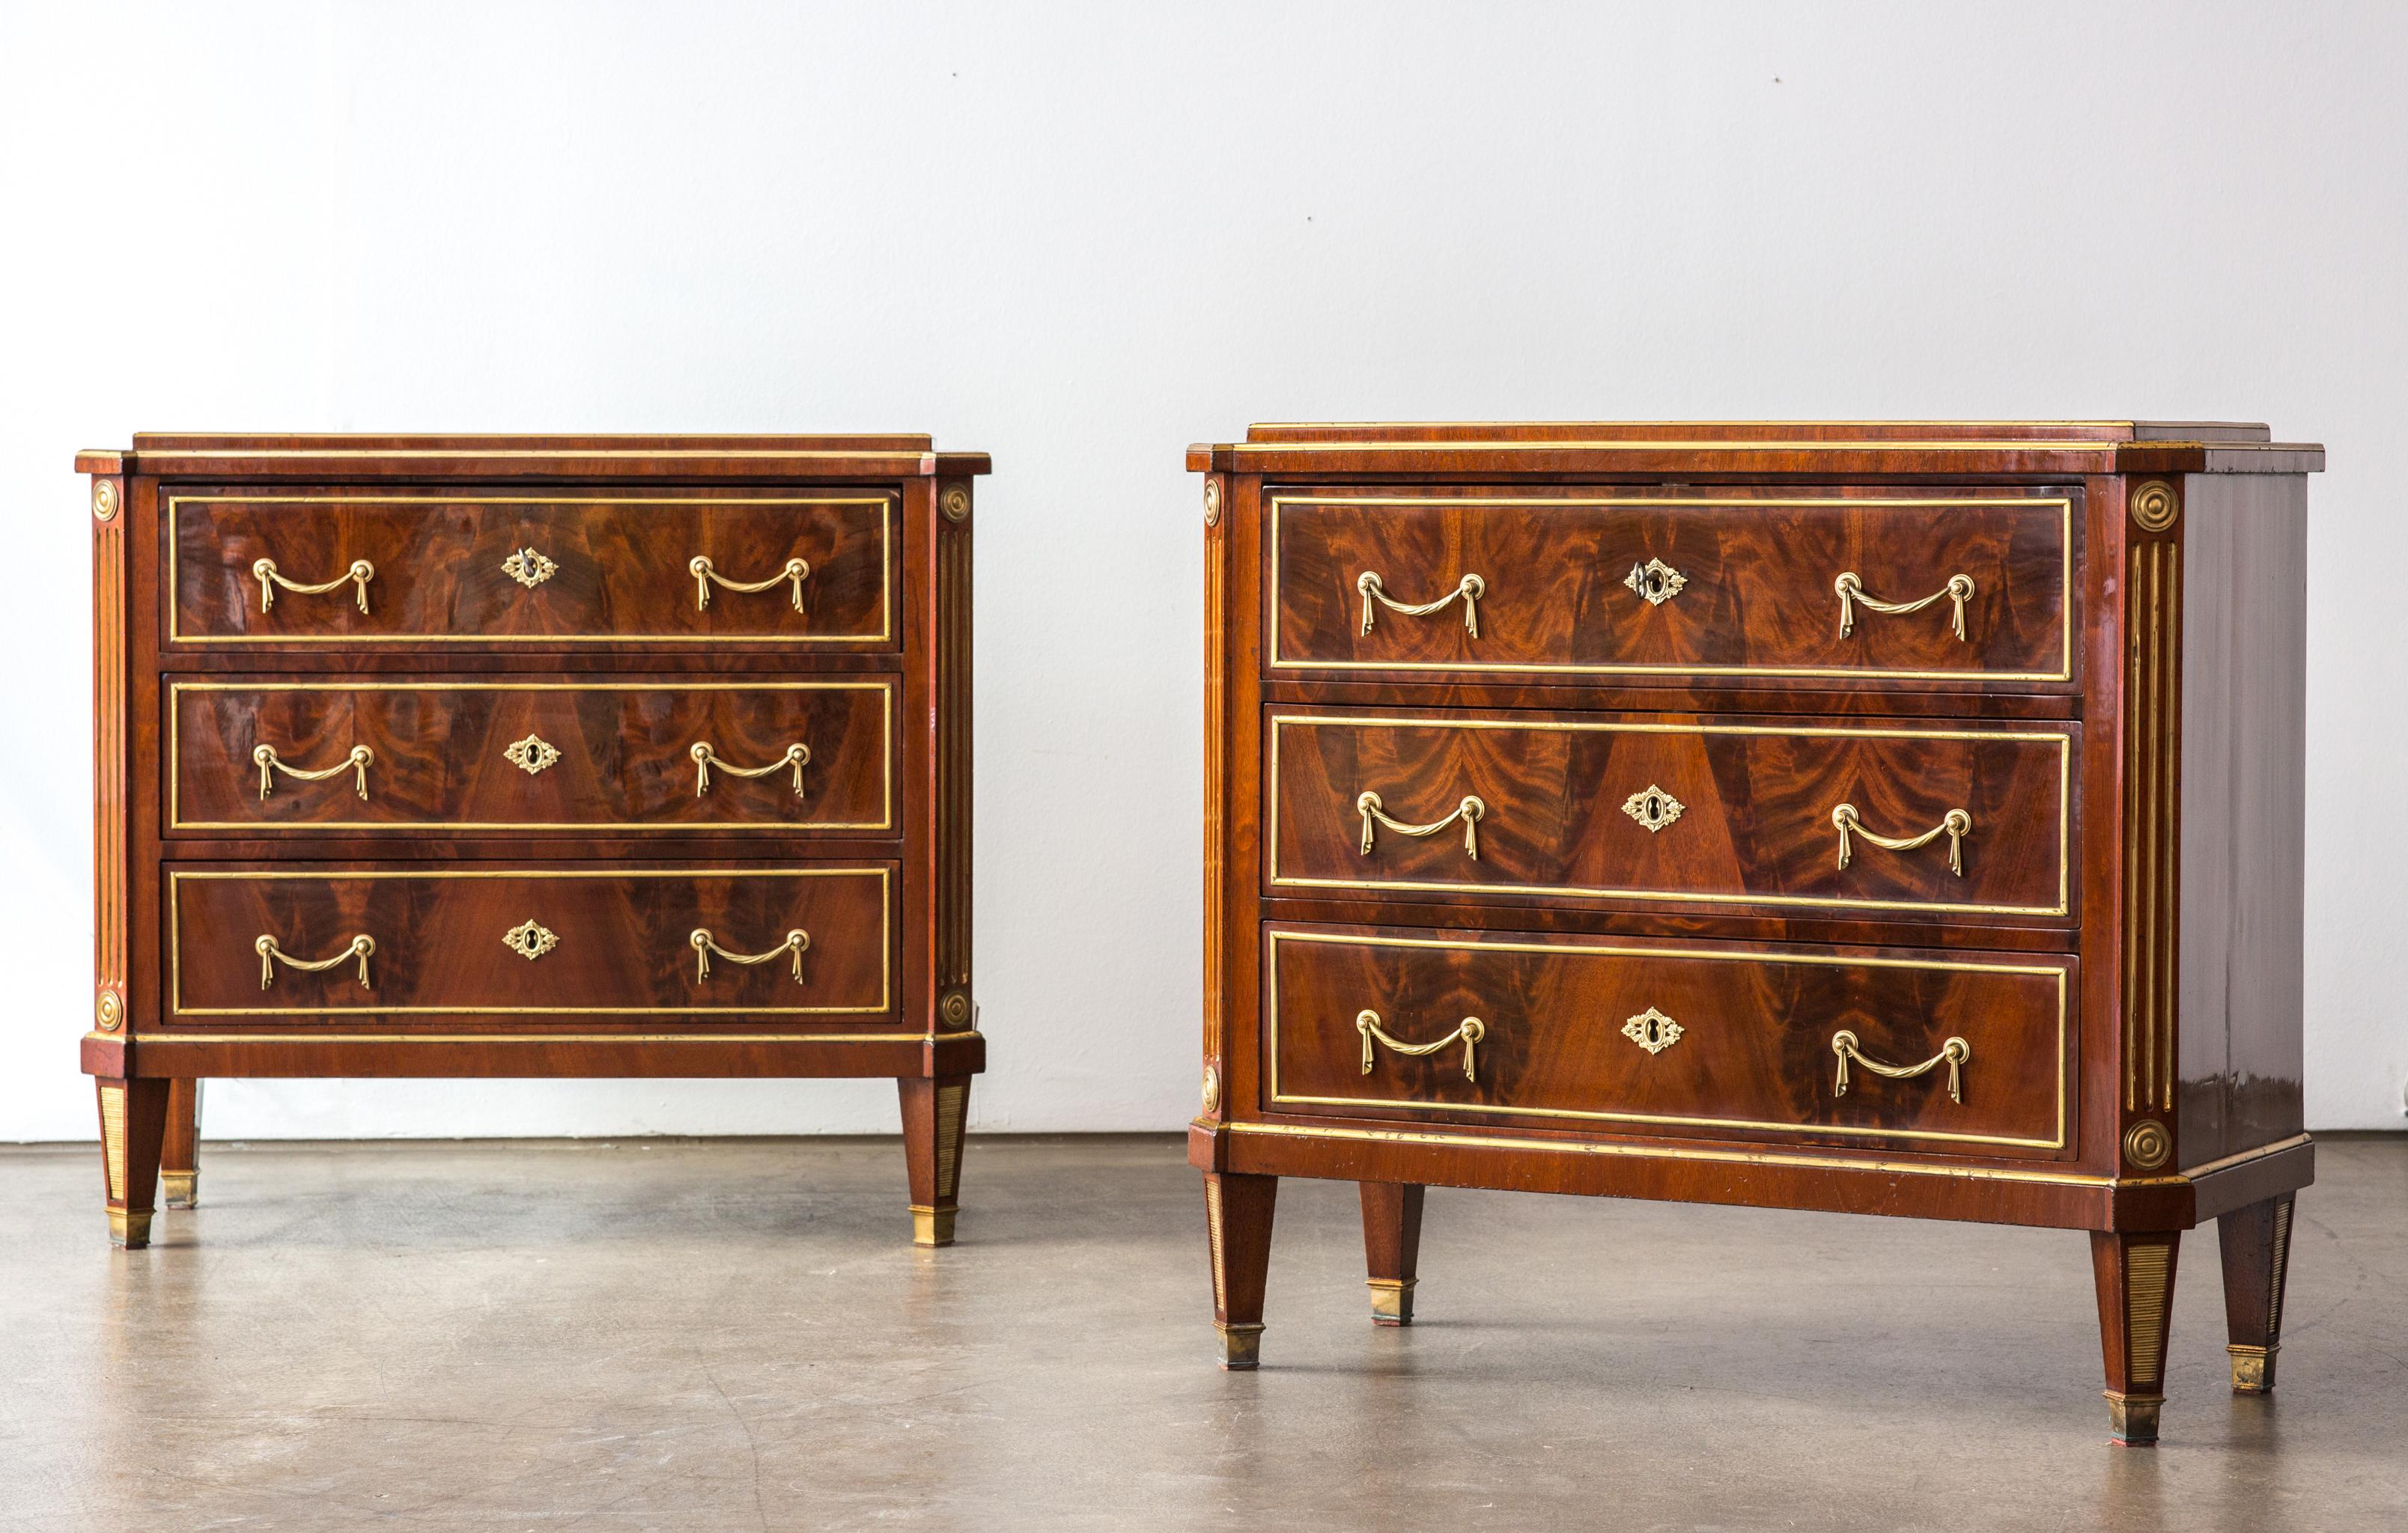 Russian Antique Pair of Neoclassical Mahogany Louis XVI Chests from Russia, 19th Century